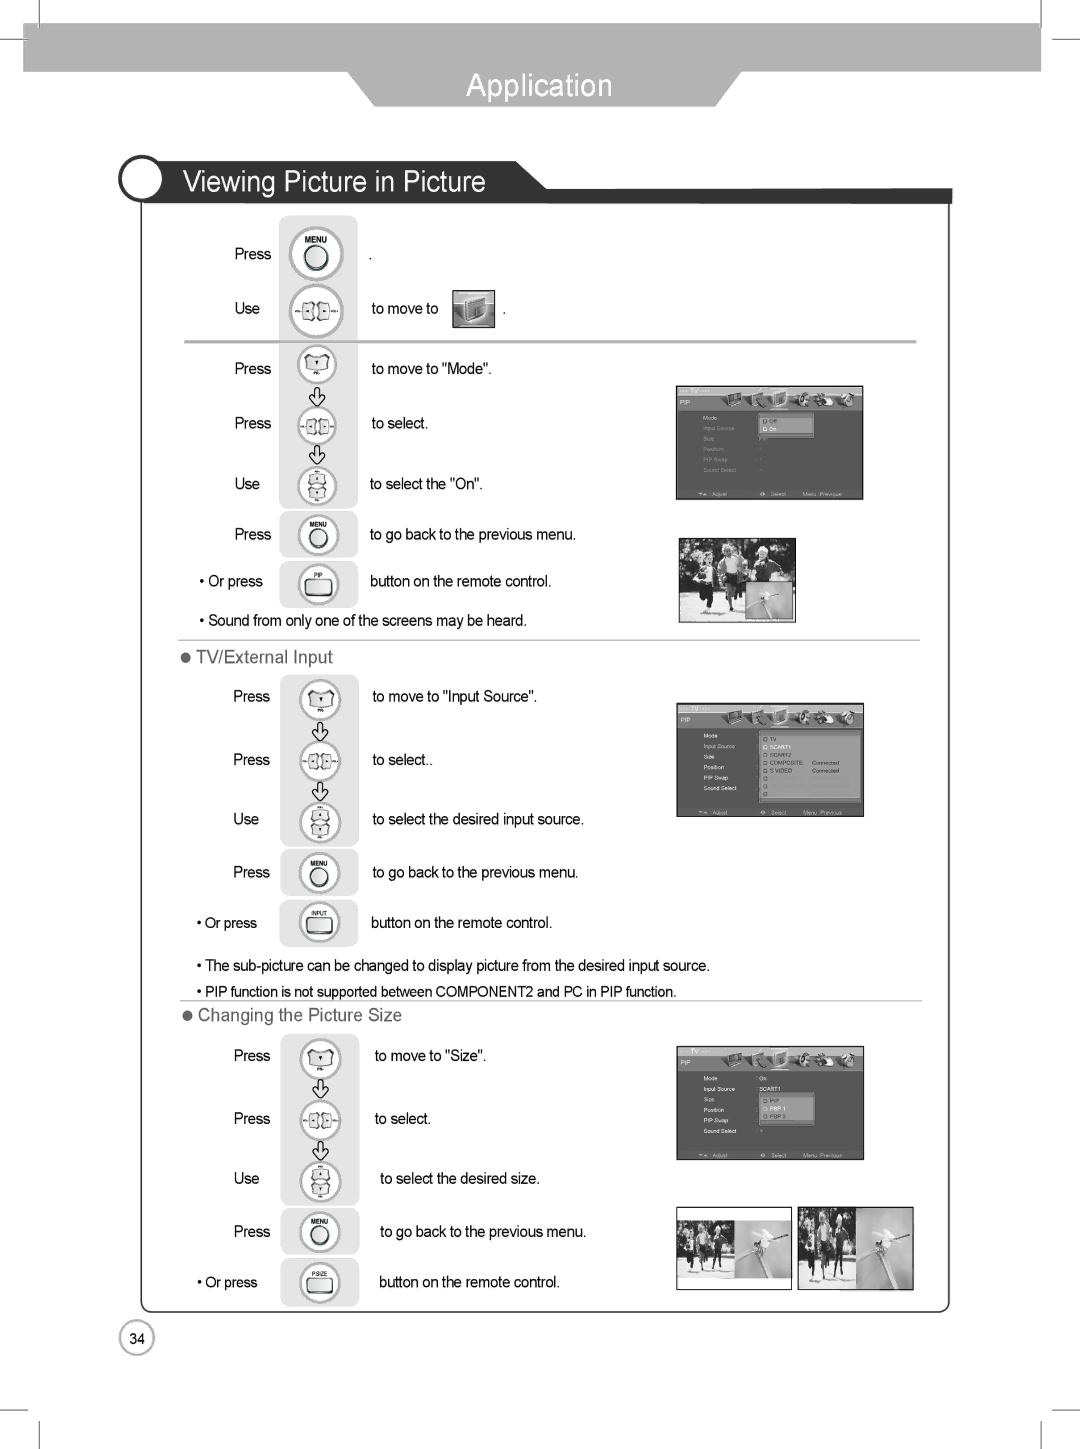 Daewoo DLP-3022, DLP-2622 user manual Viewing Picture in Picture, ・ TV/External Input, ・ Changing the Picture Size 